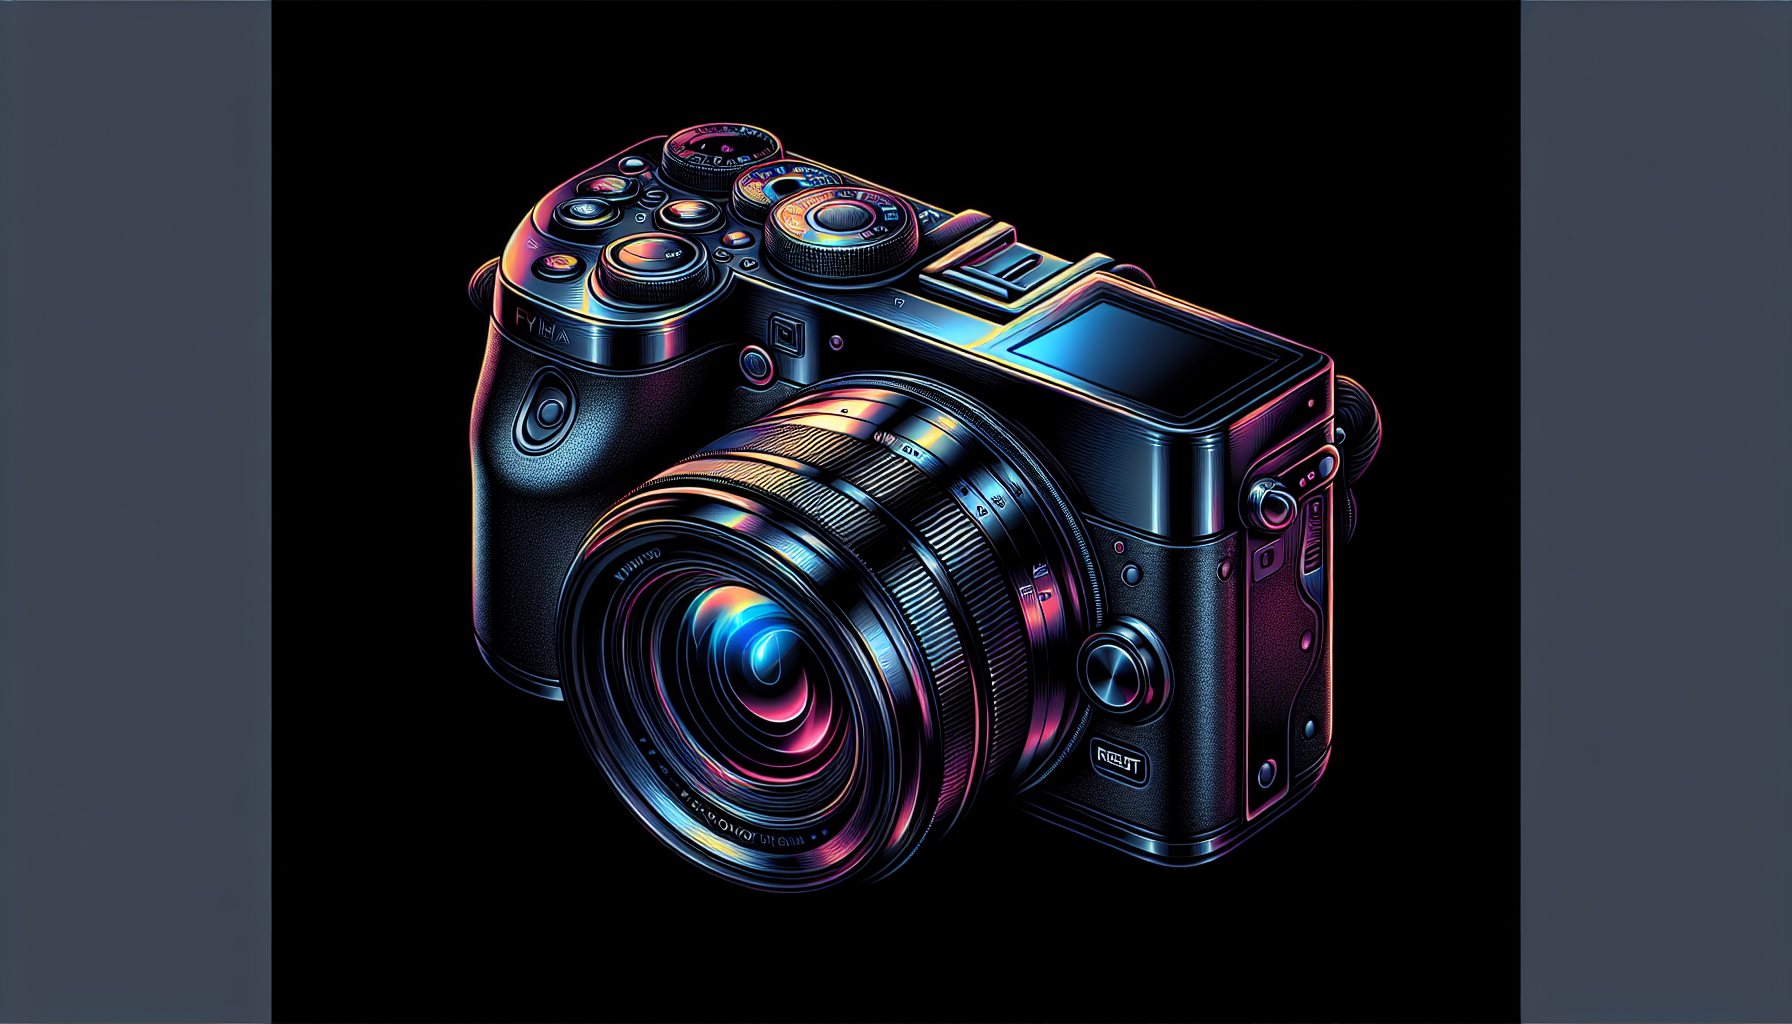 Illustration of a camera with reset button